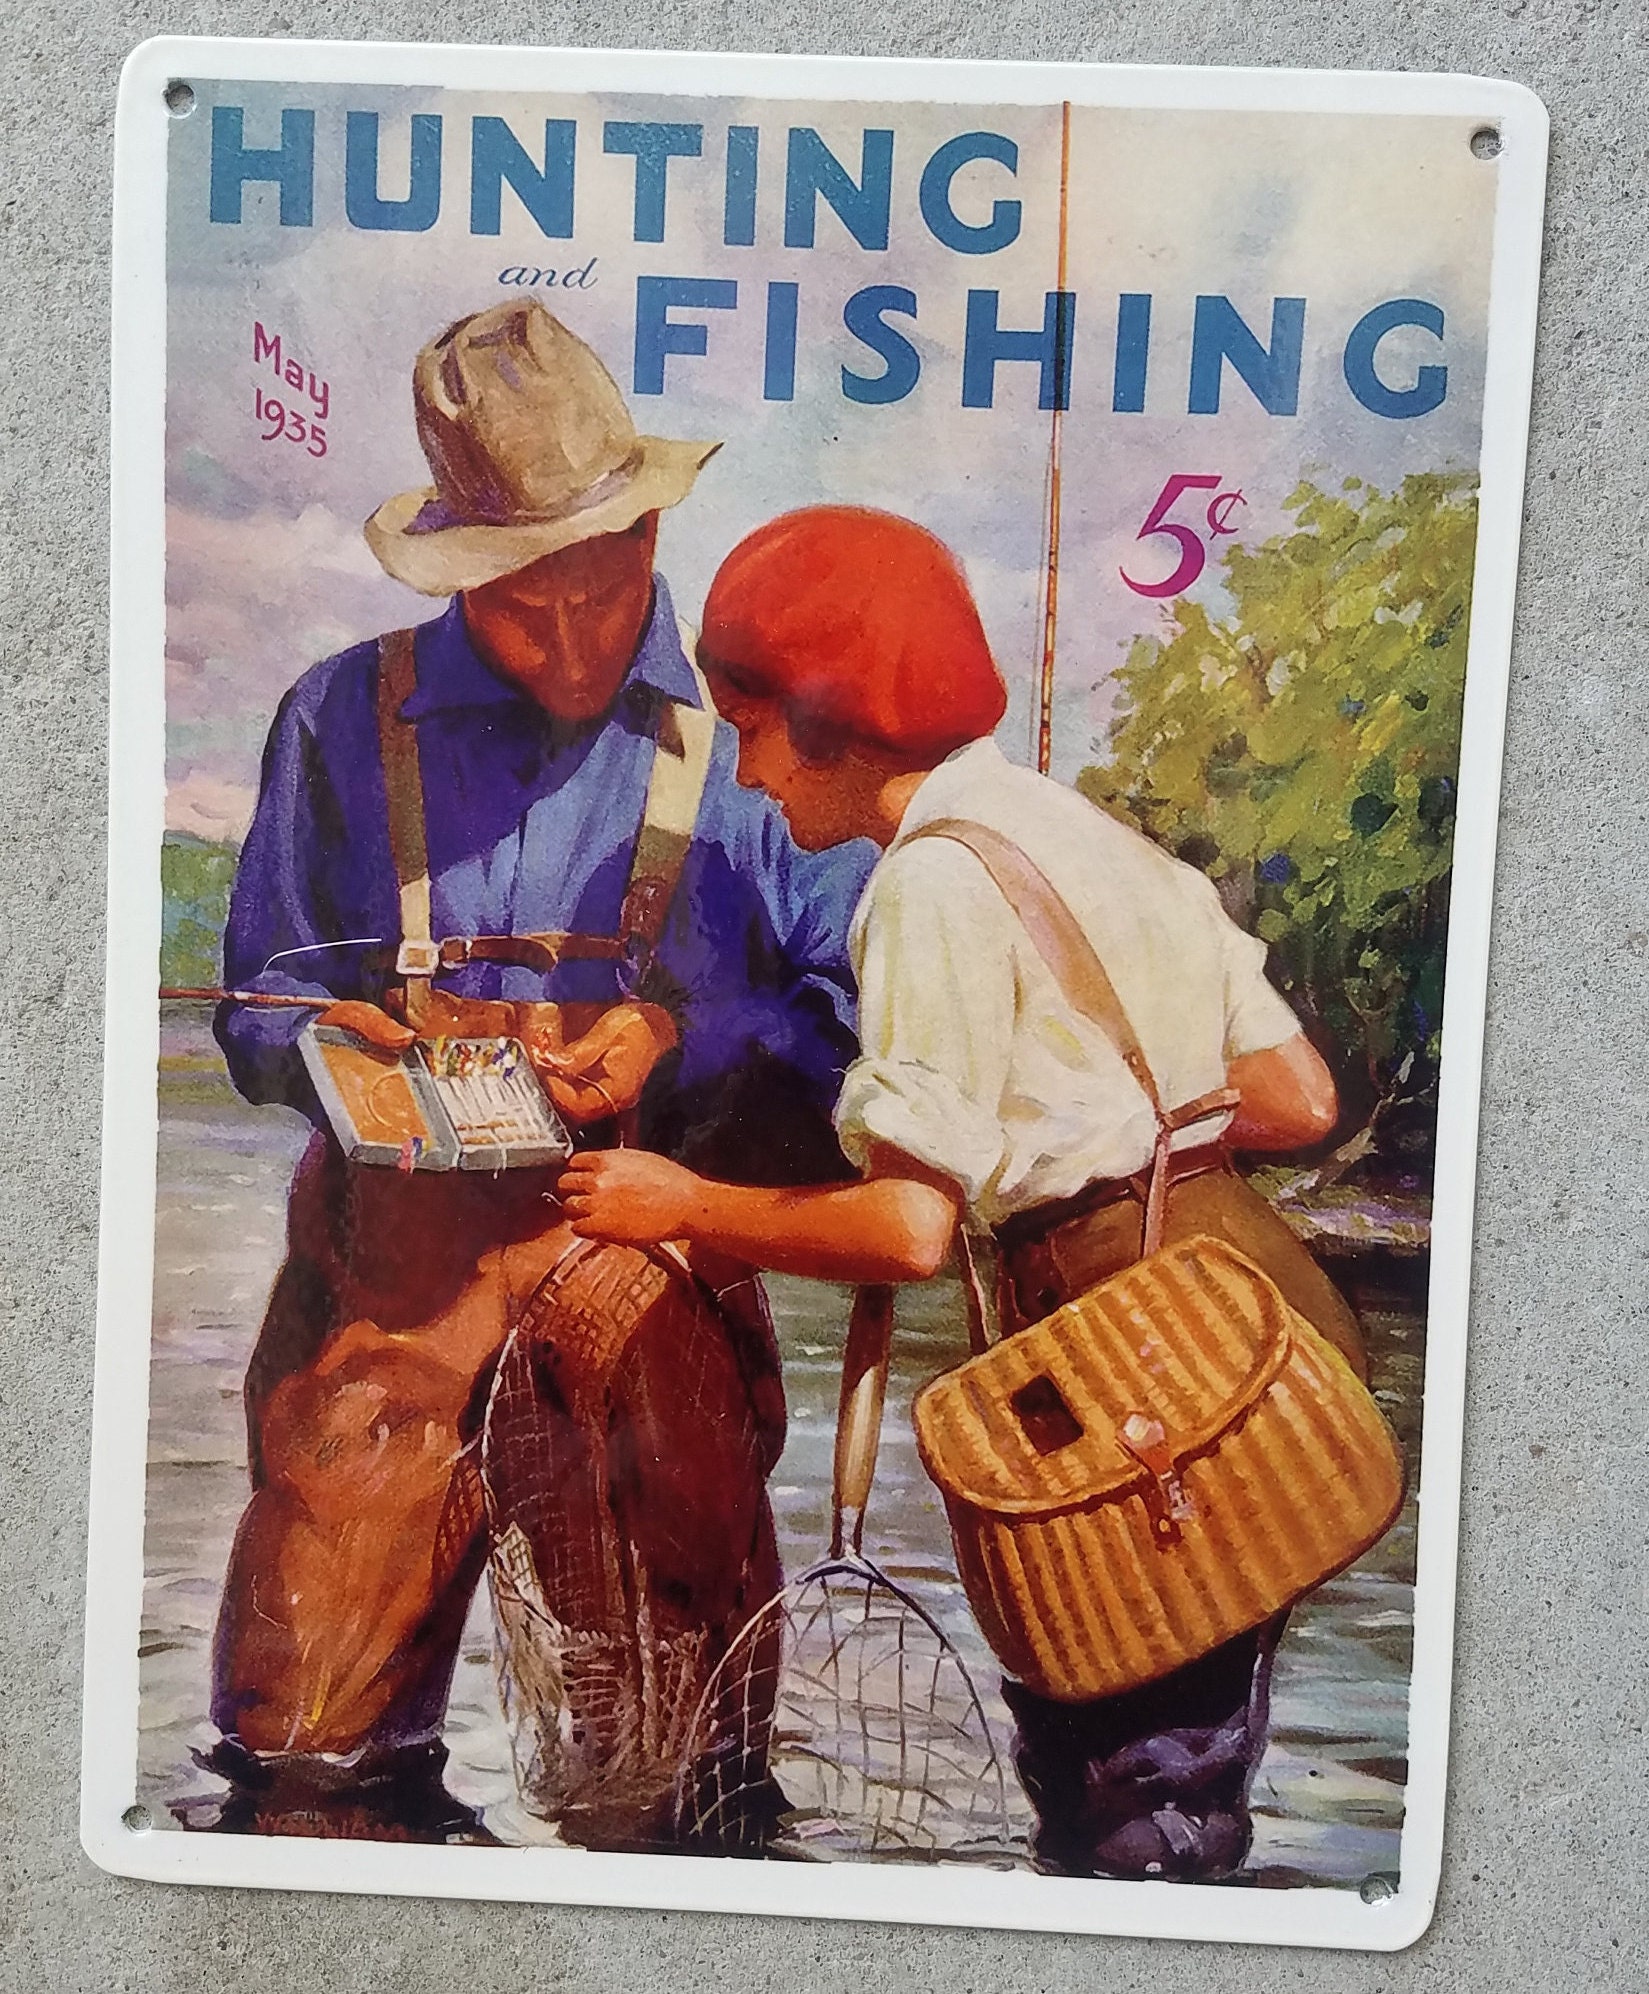 Vintage Hunting and Fishing Magazine Cover Metal Sign Reproduction